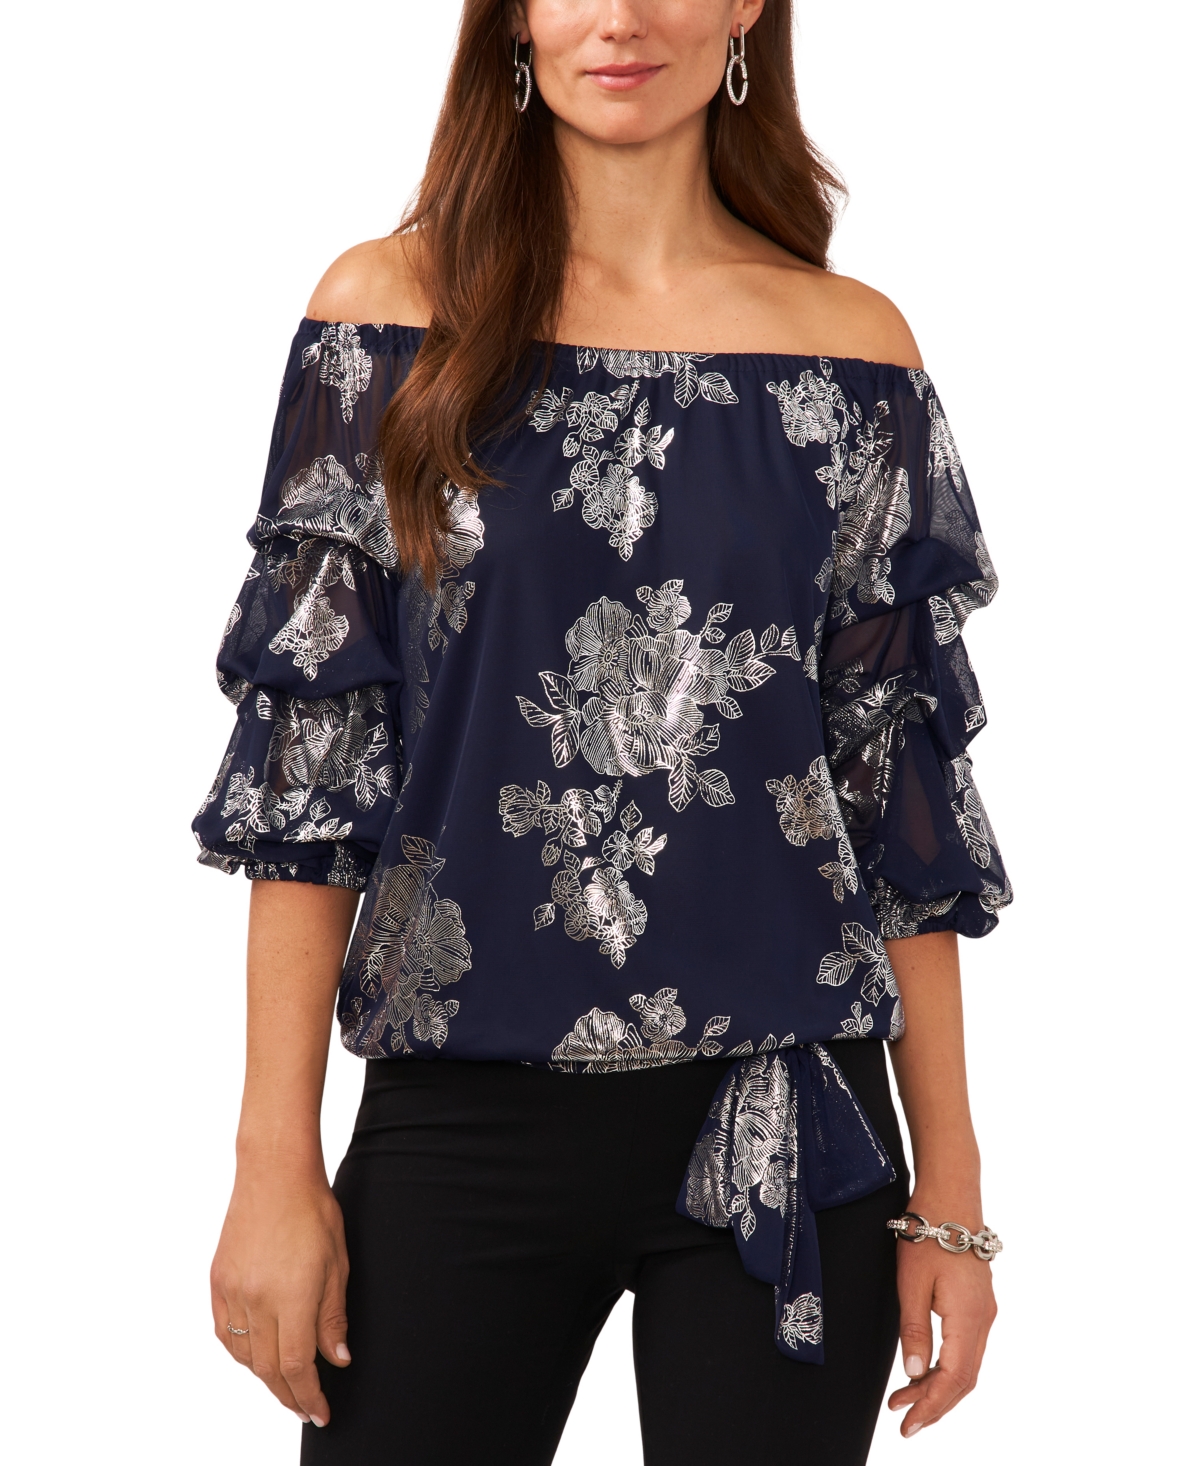 Women's Floral-Print Off-The-Shoulder Top - Navy/Silver